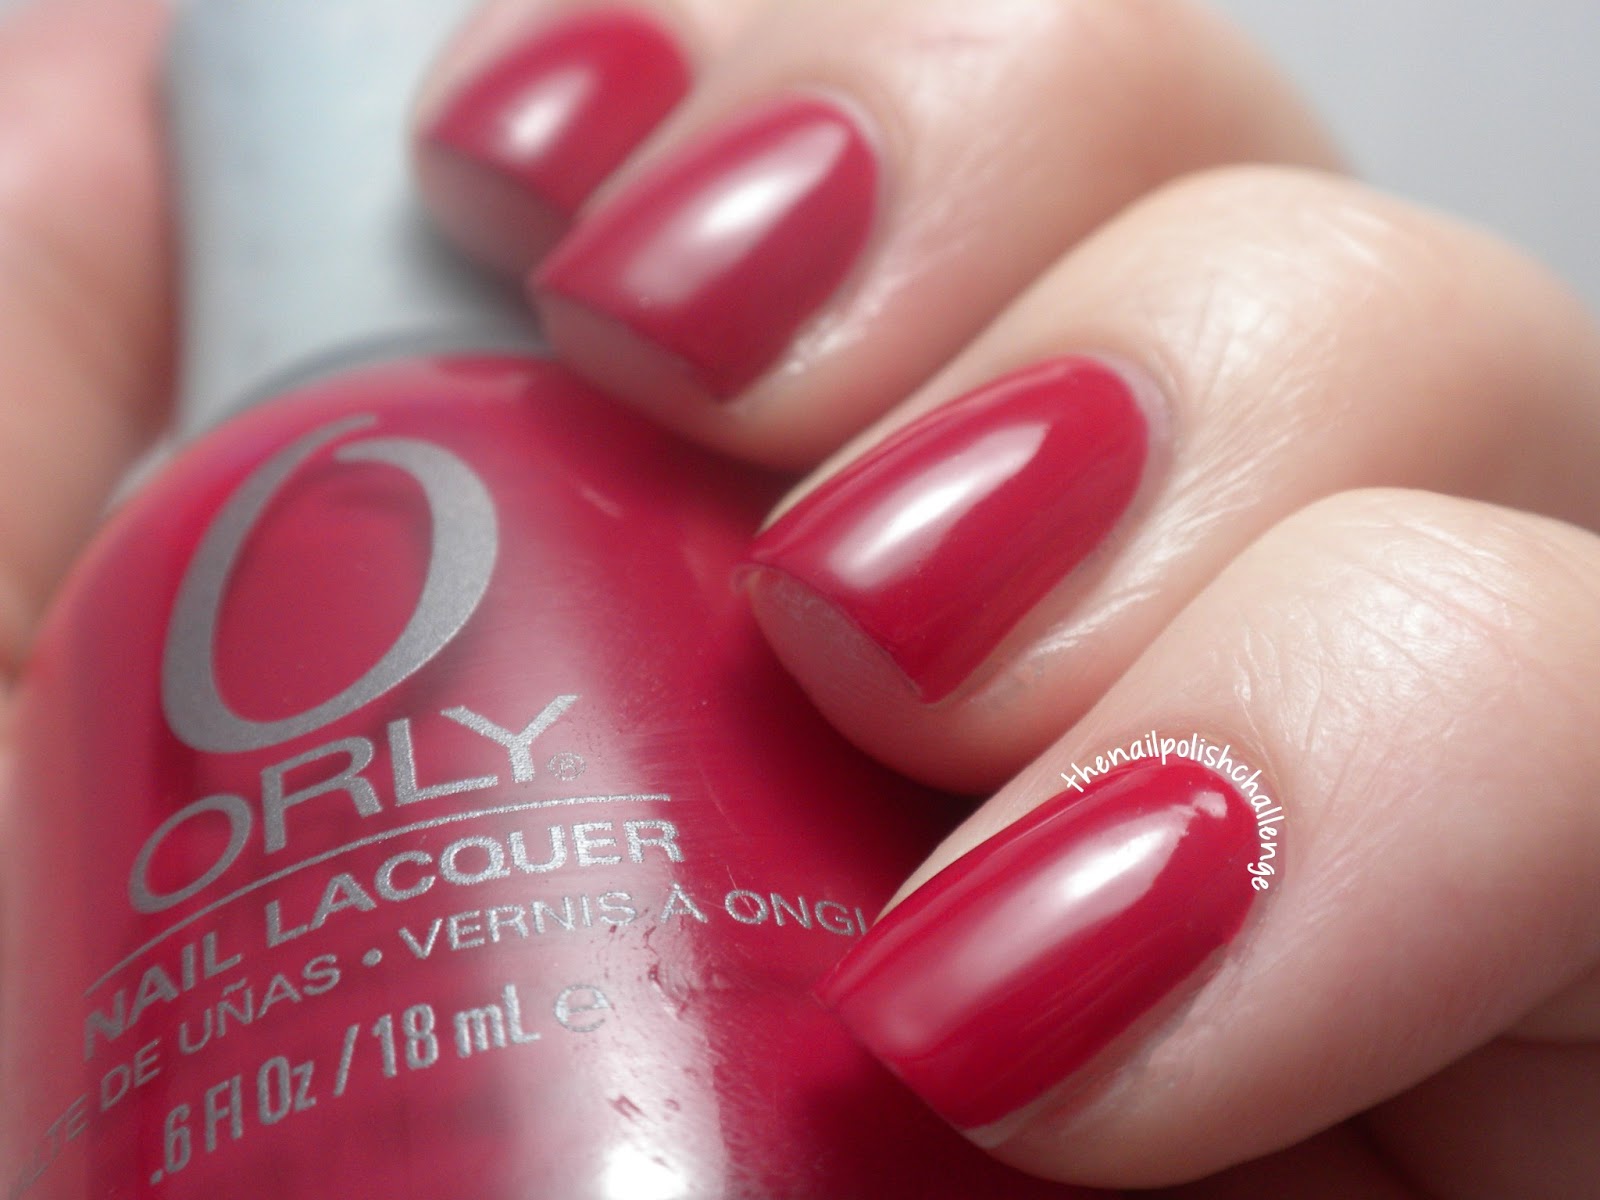 orly red flare